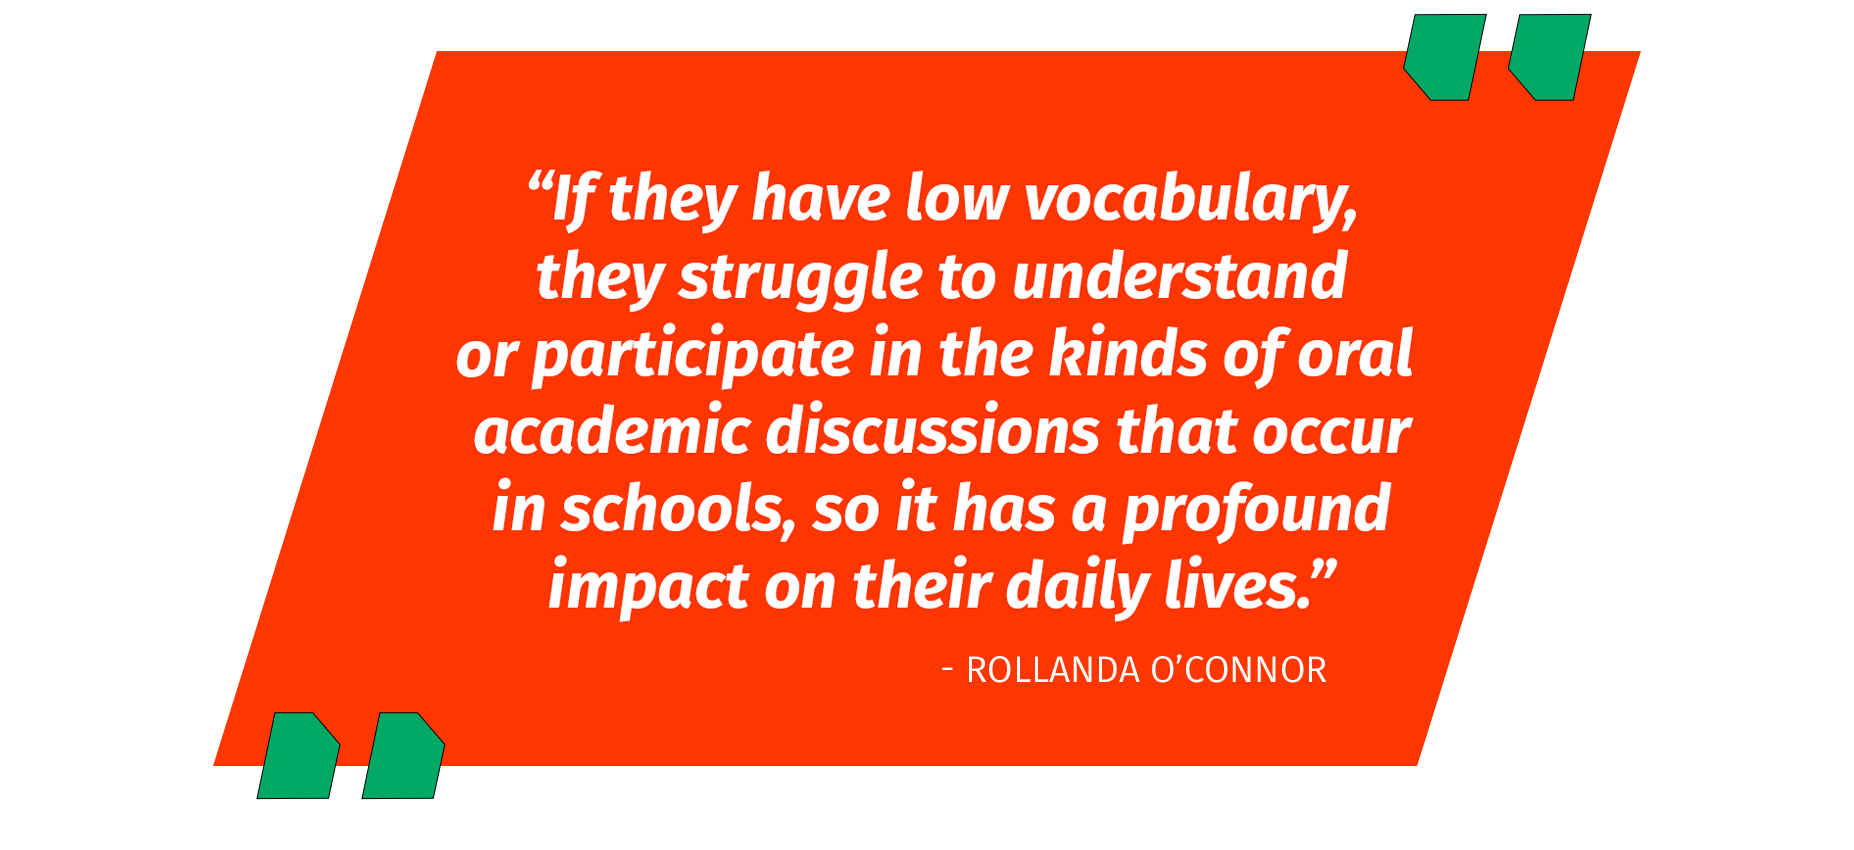 “If they have low vocabulary,  they struggle to understand orparticipate in the kinds of oral academic discussions that occur in schools, so it has a profound impact on their daily lives.”